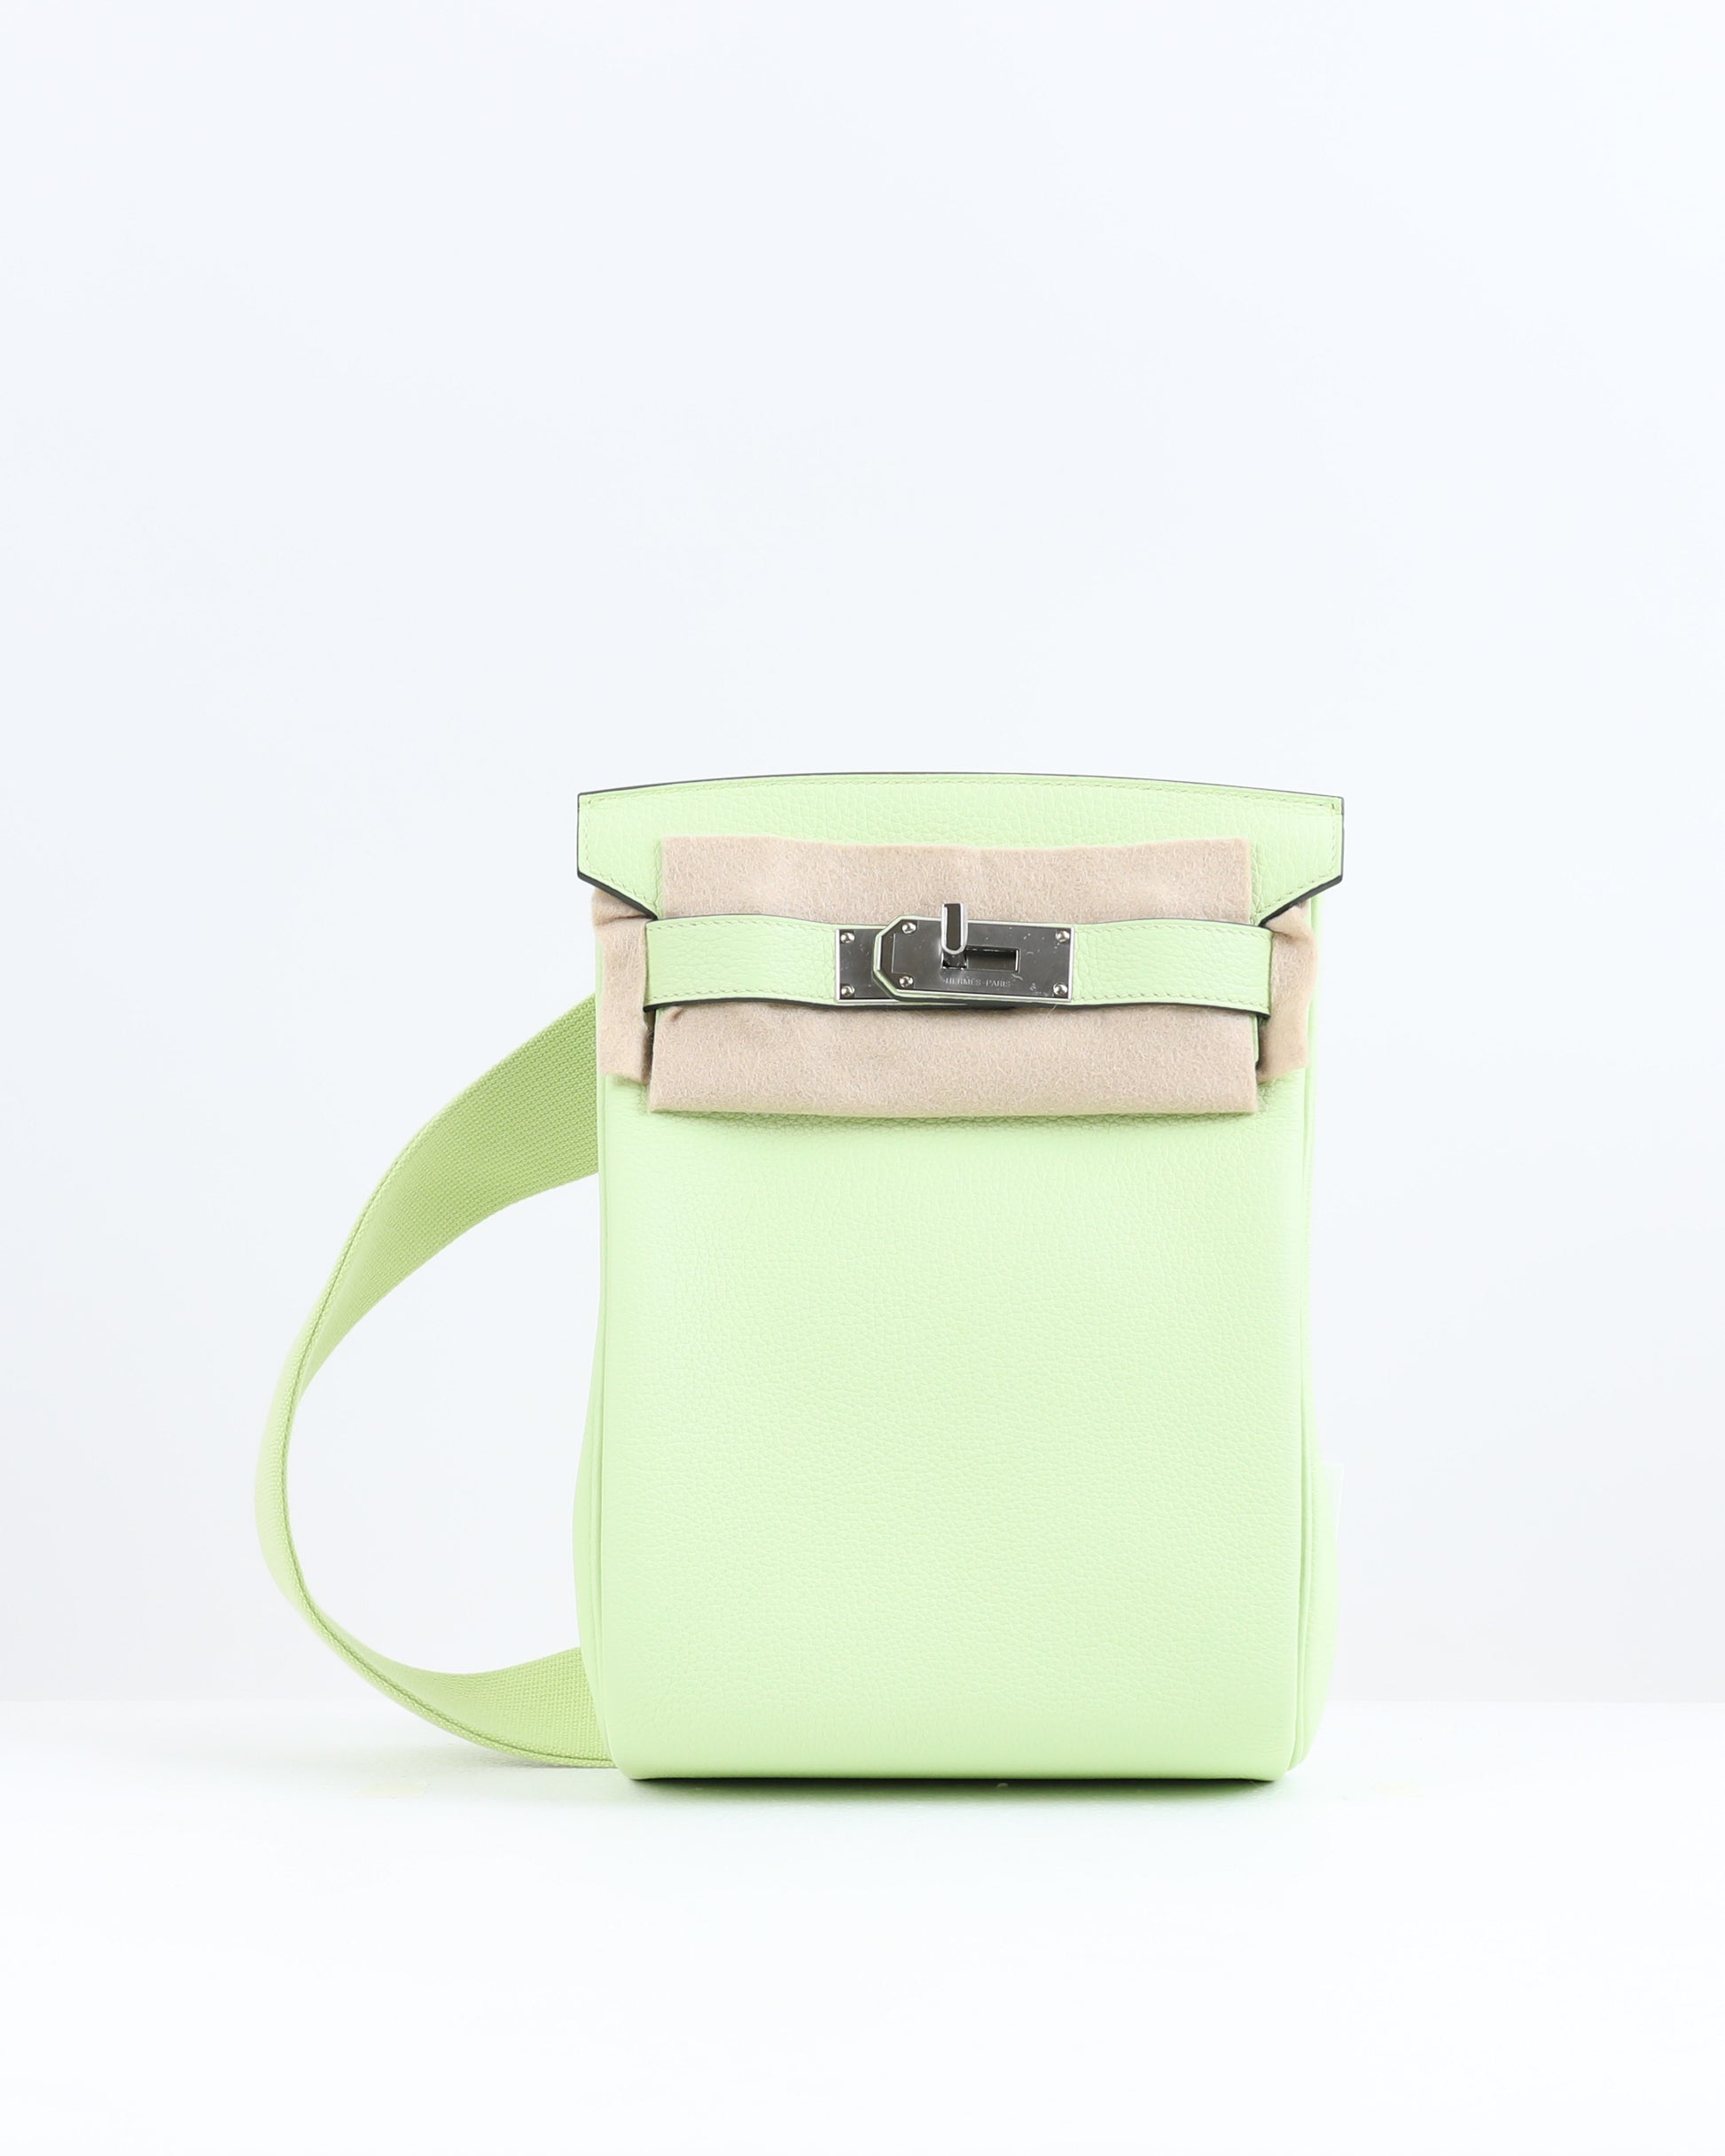 Hac A Dos PM Backpack Vert Absinthe in Togo Leather with Palladium